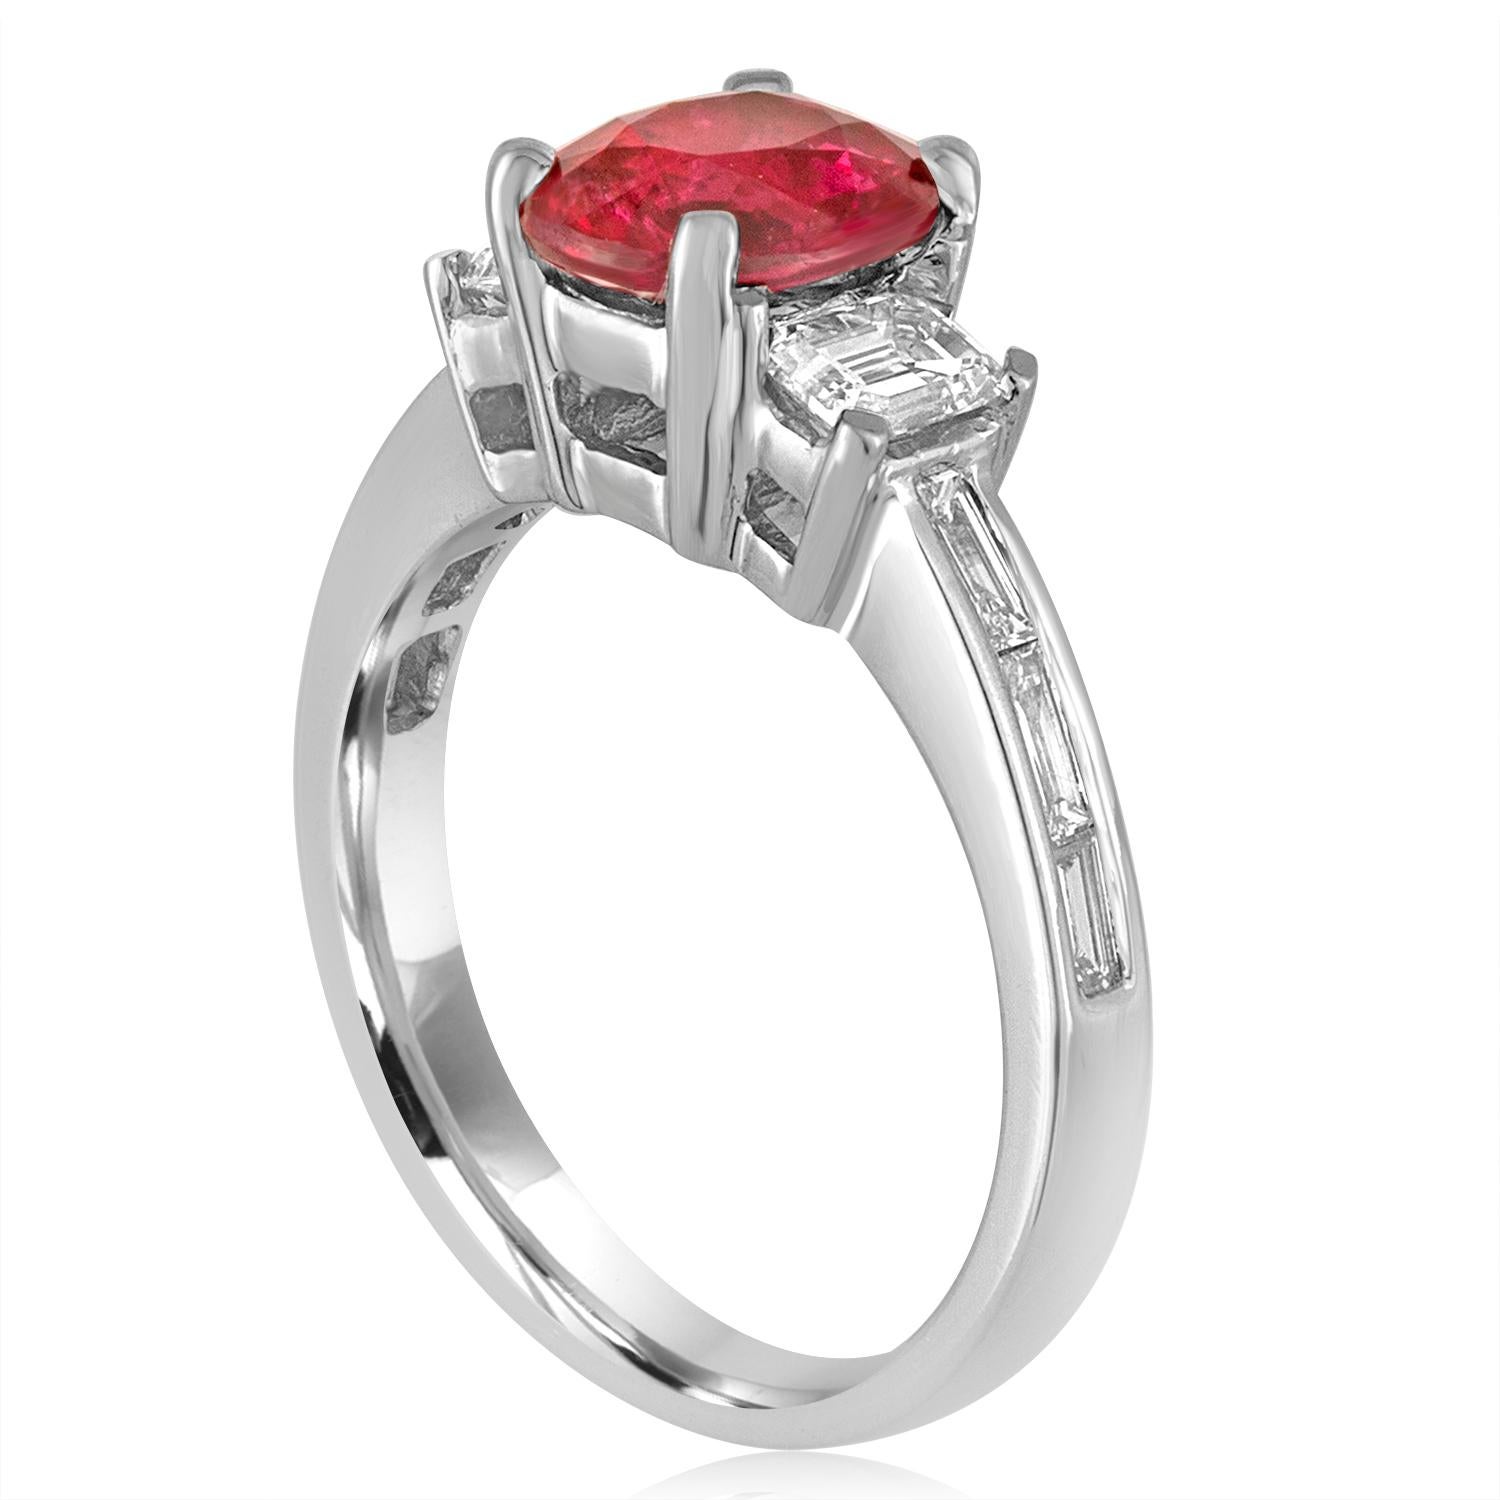 Beautiful Three-Stone Ring
The ring is 18K White Gold
There are 0.82 Carats in diamonds F/G VS/SI
The center is an Oval Red Ruby 2.01 Carats NO HEAT.
The Ruby is certified by LAPIS.
The ring is a size 6.5, sizable.
The ring weighs 5.8 grams